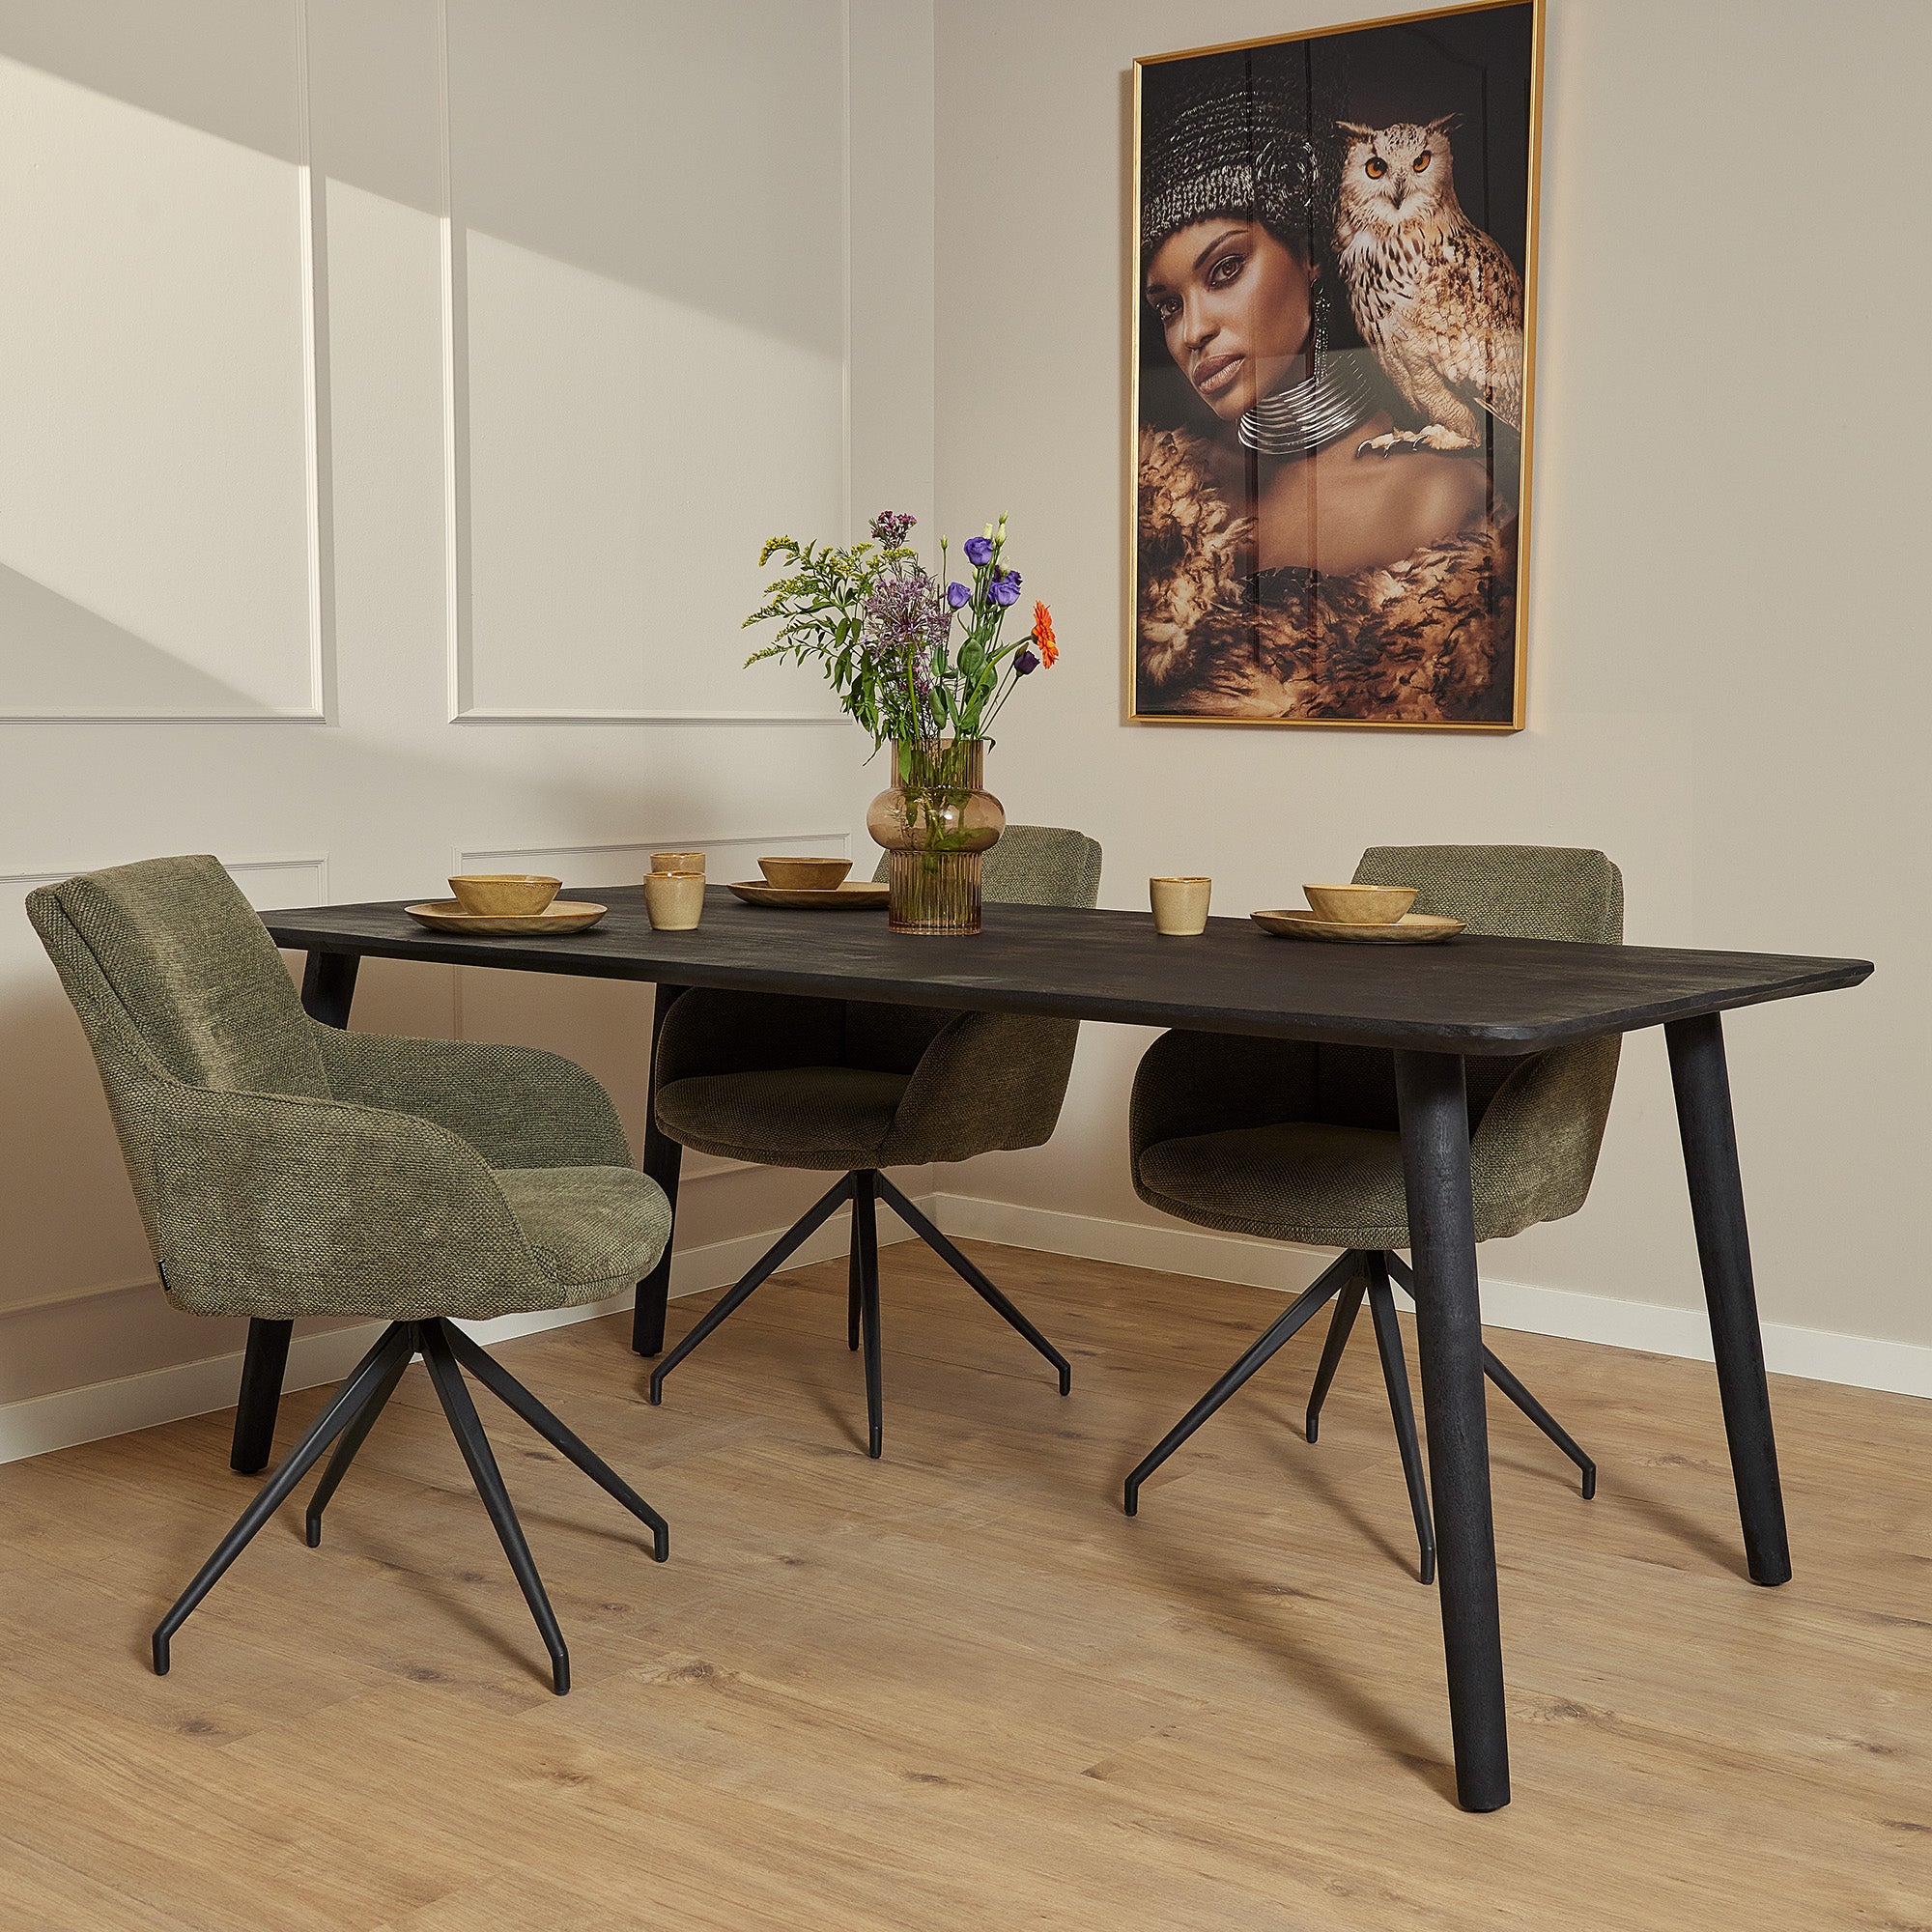 Dining room table Natural | rectangle | 180 x 180 x 76(h) cm